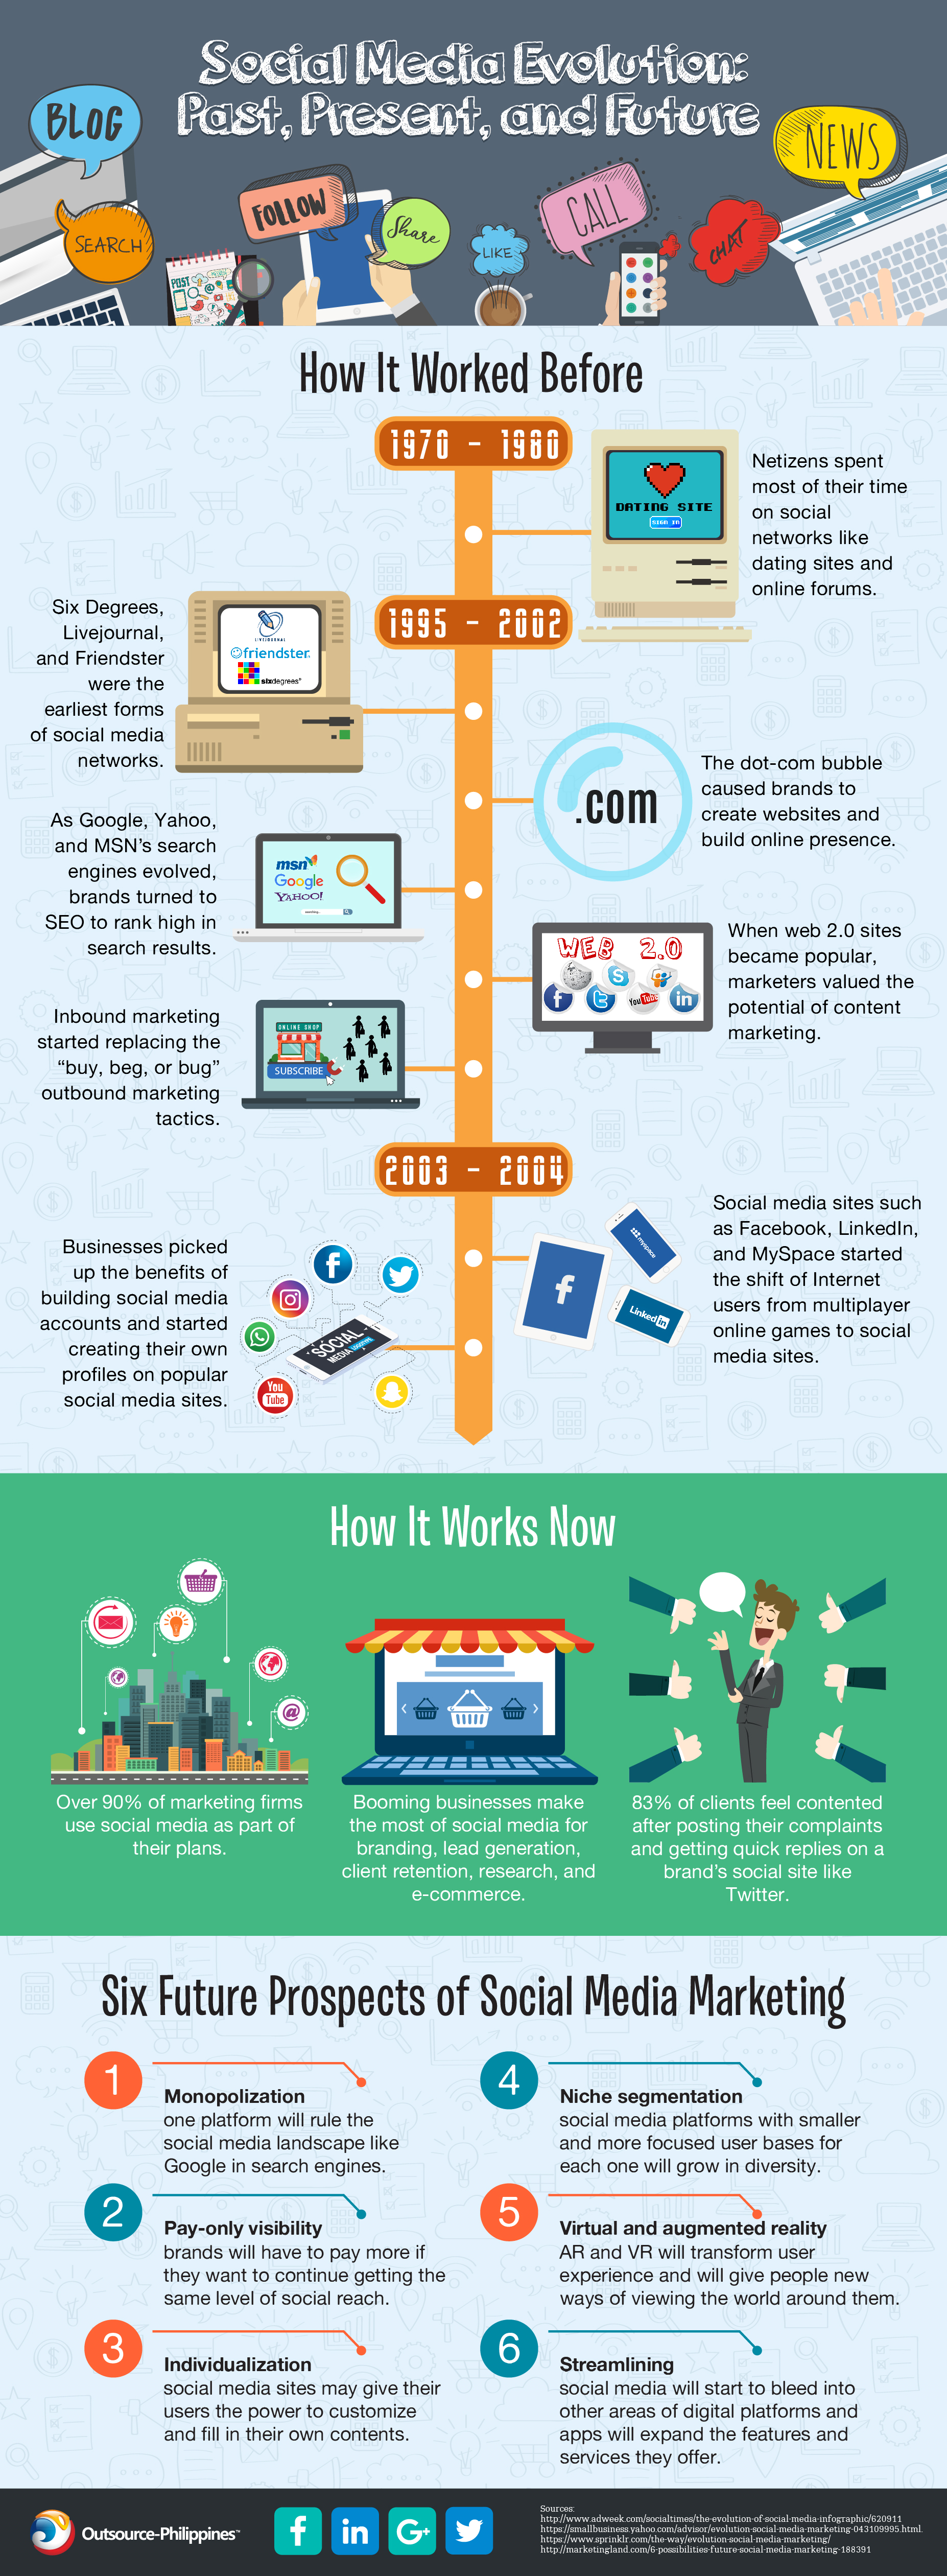 The evolution of social media: how it works before and how it works now